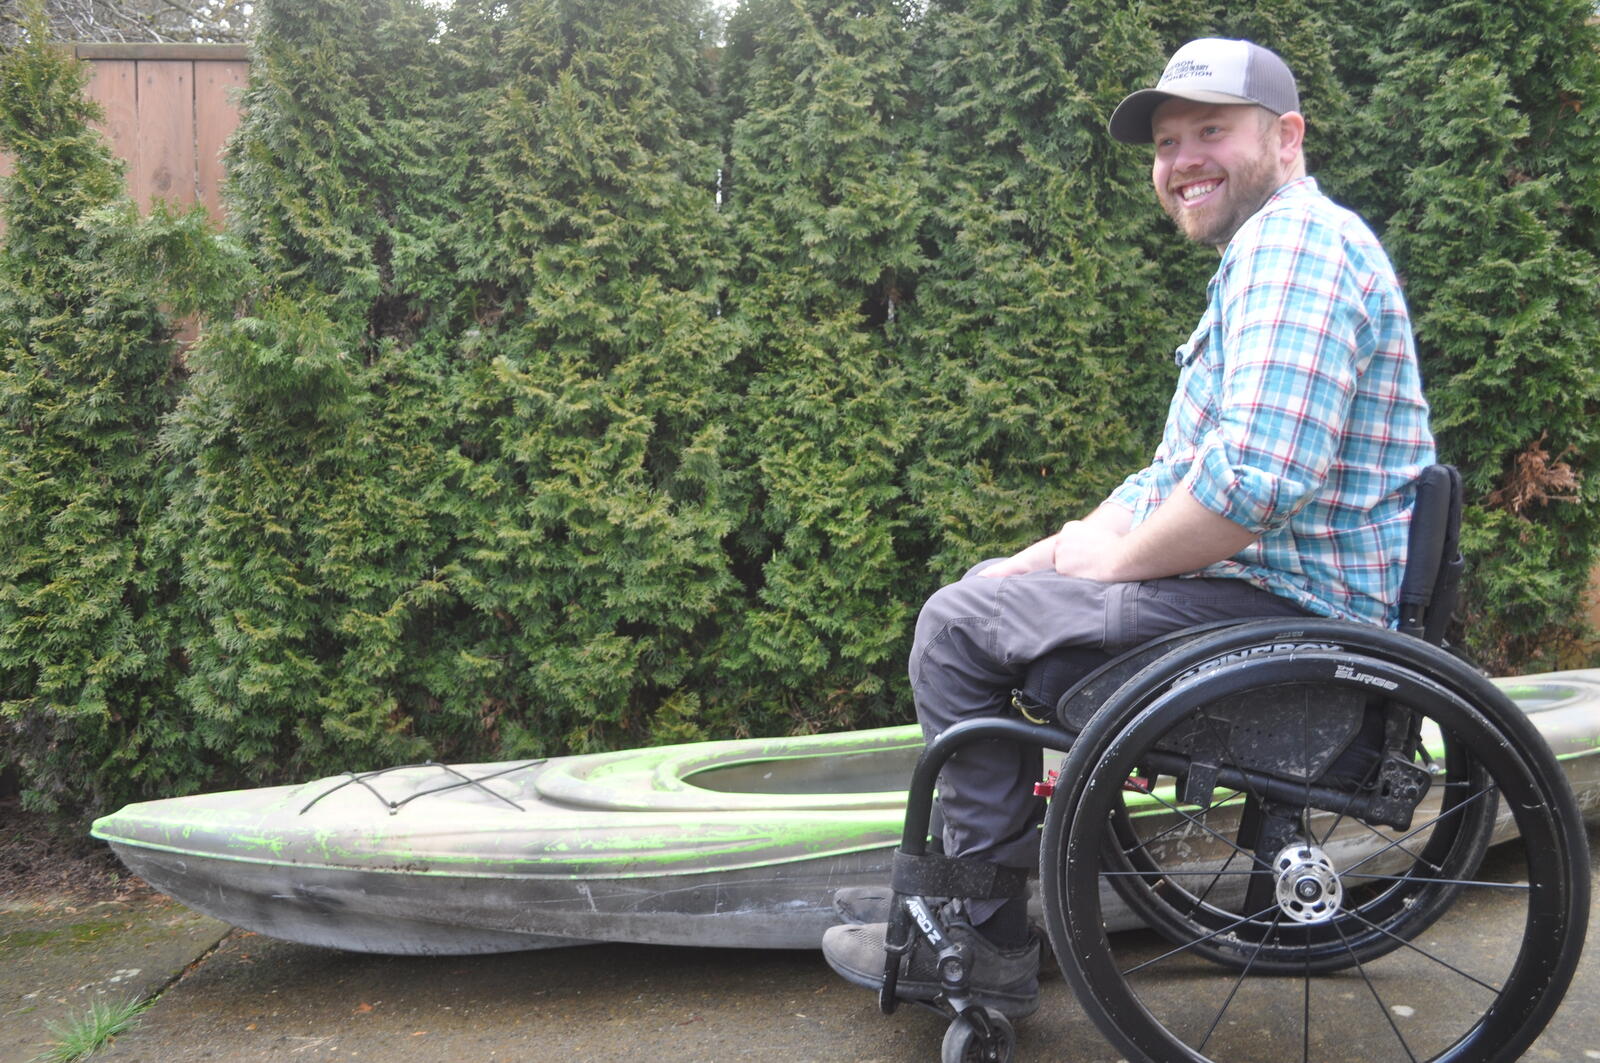 White man wearing a baseball cap and a blue flannel shirt sitting in a wheelchair beside a green and black kayak. Behind him is a wall of green shrubbery.